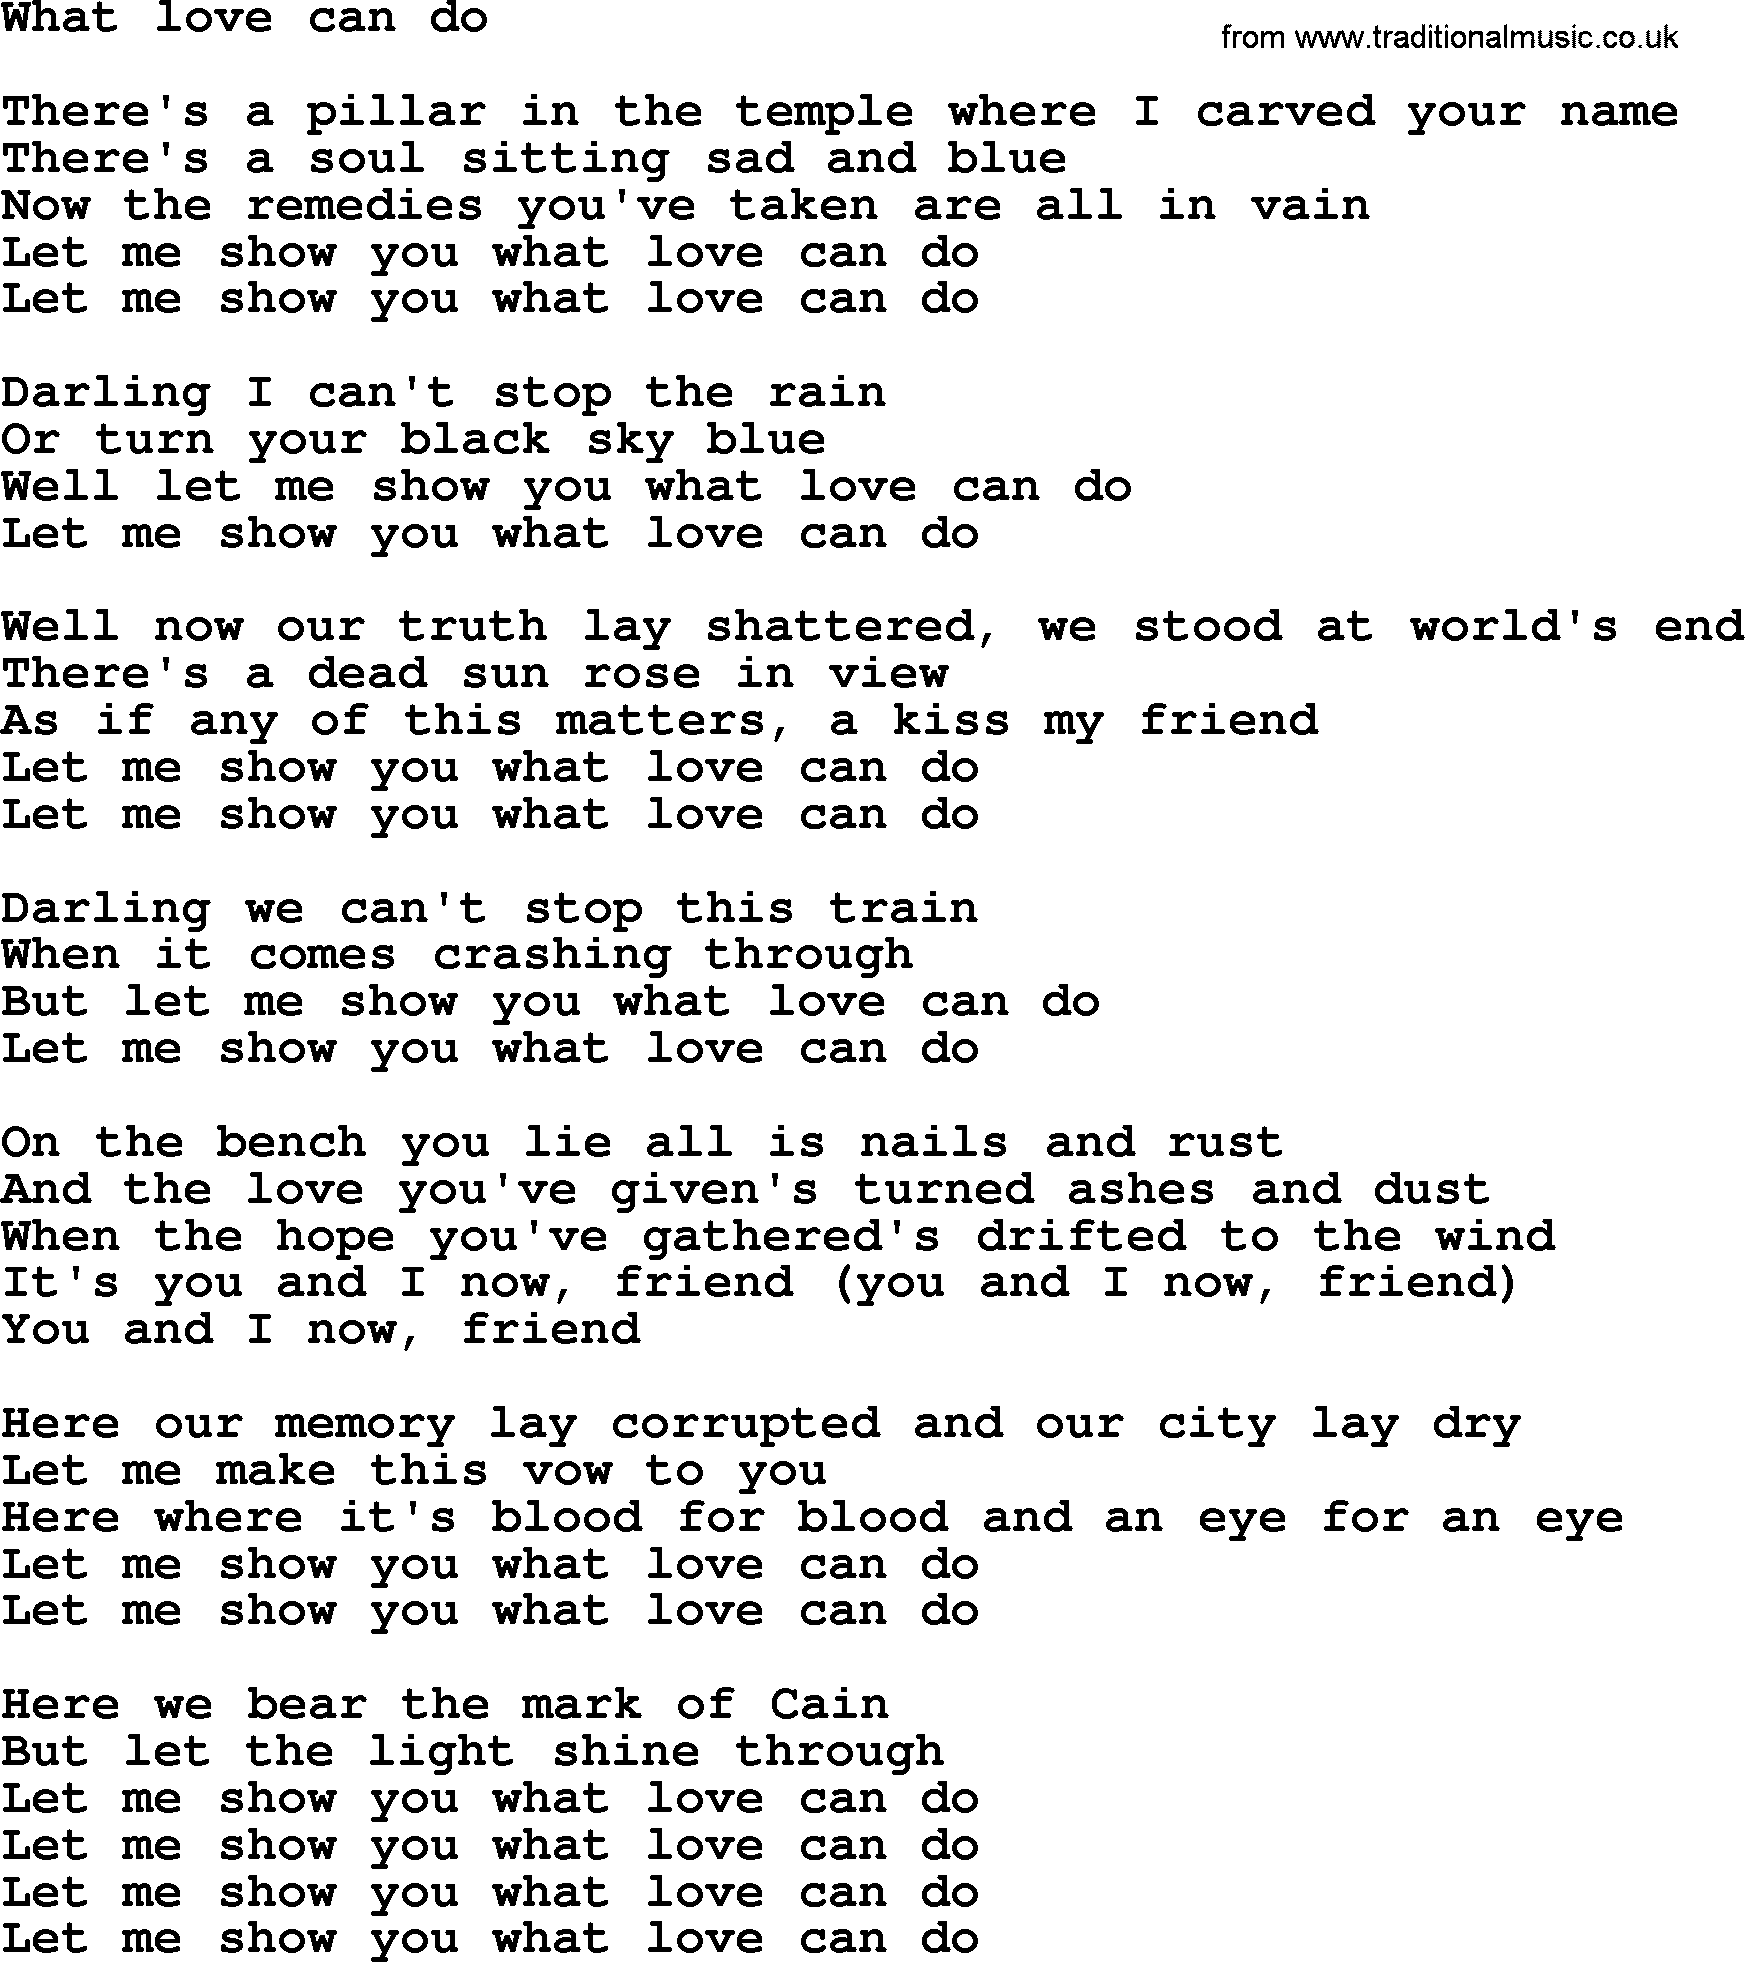 Bruce Springsteen song: What Love Can Do lyrics